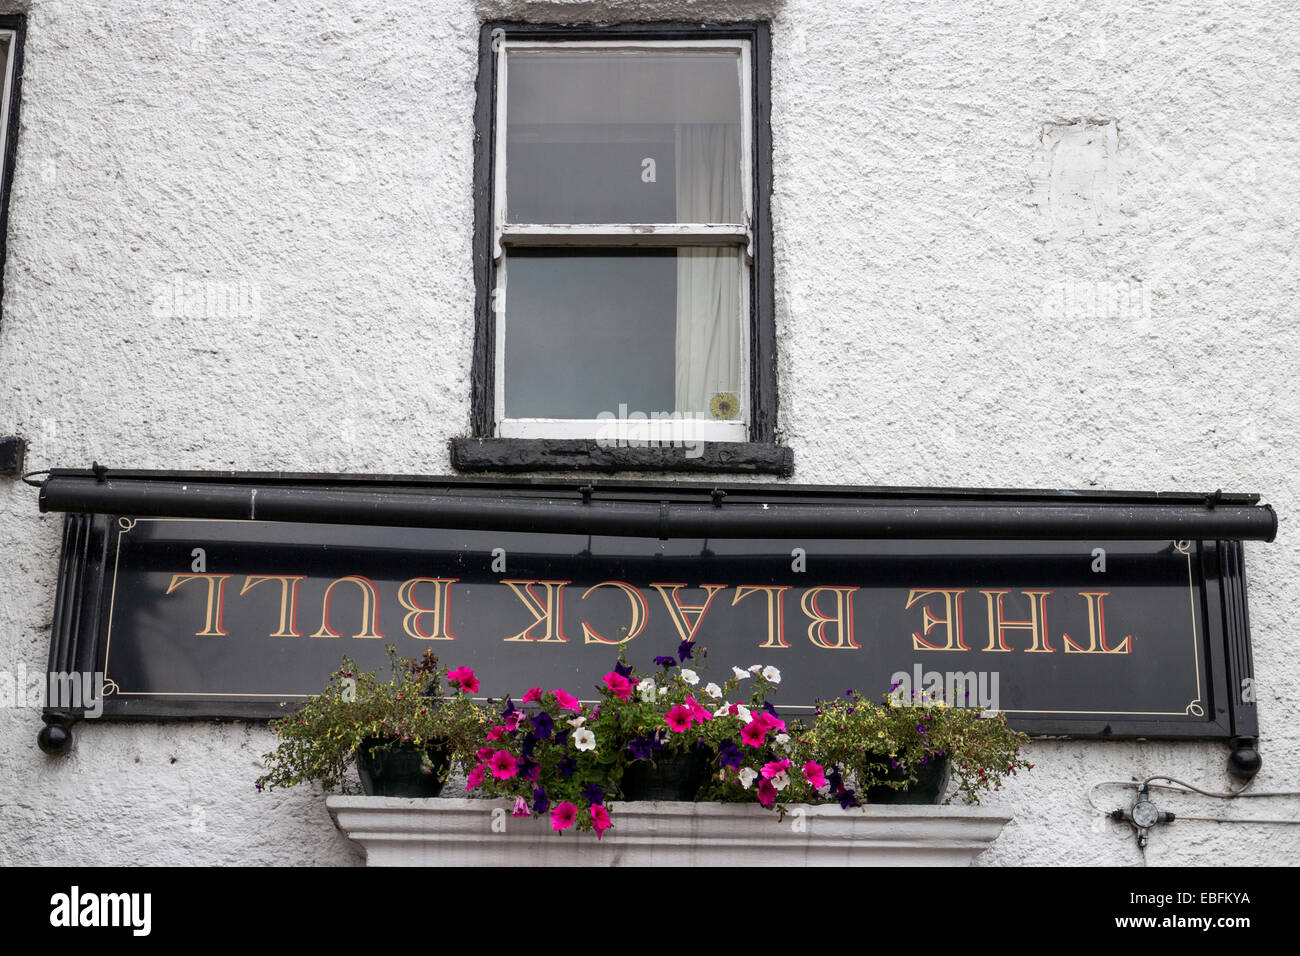 The Black Bull Hotel in Reeth, North Yorkshire. Stock Photo